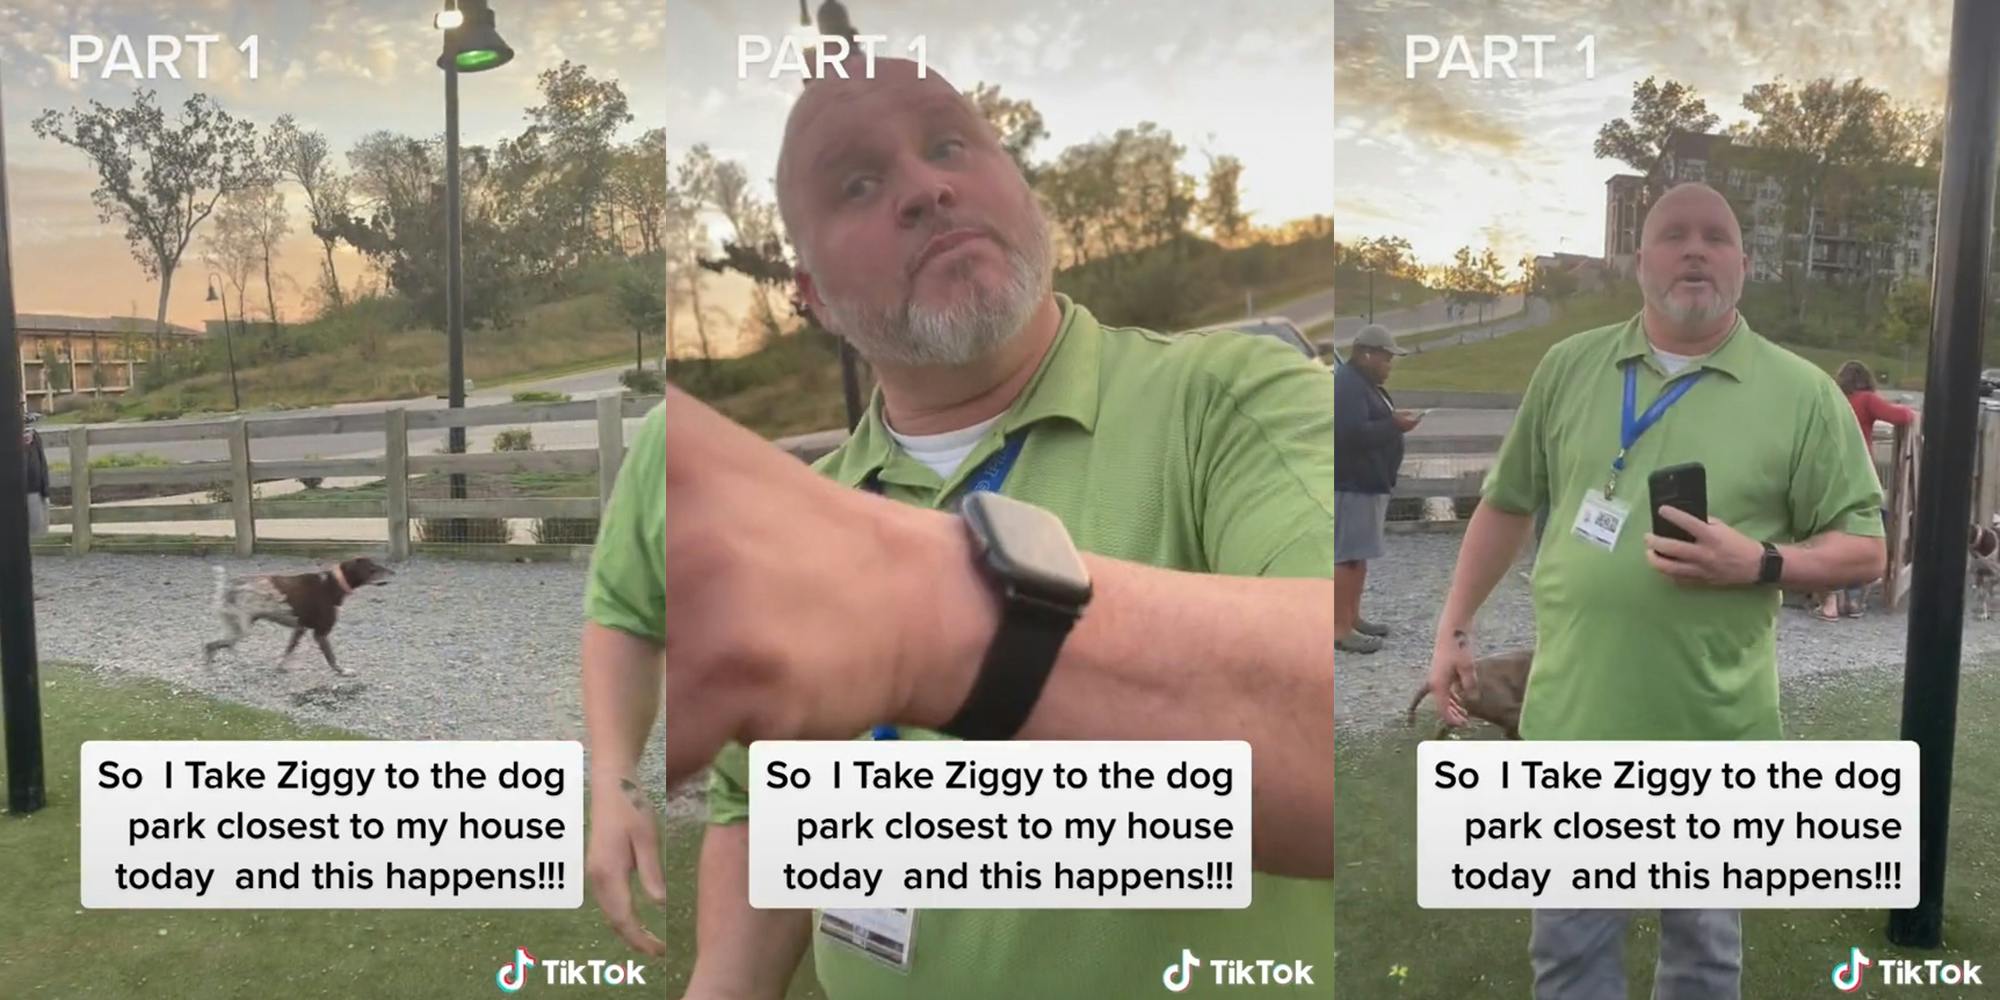 dog in park (l) man pointing (c) man with camera (r) all with caption "So I Take Ziggy to the dog park closest to my house today and this happens!!!"